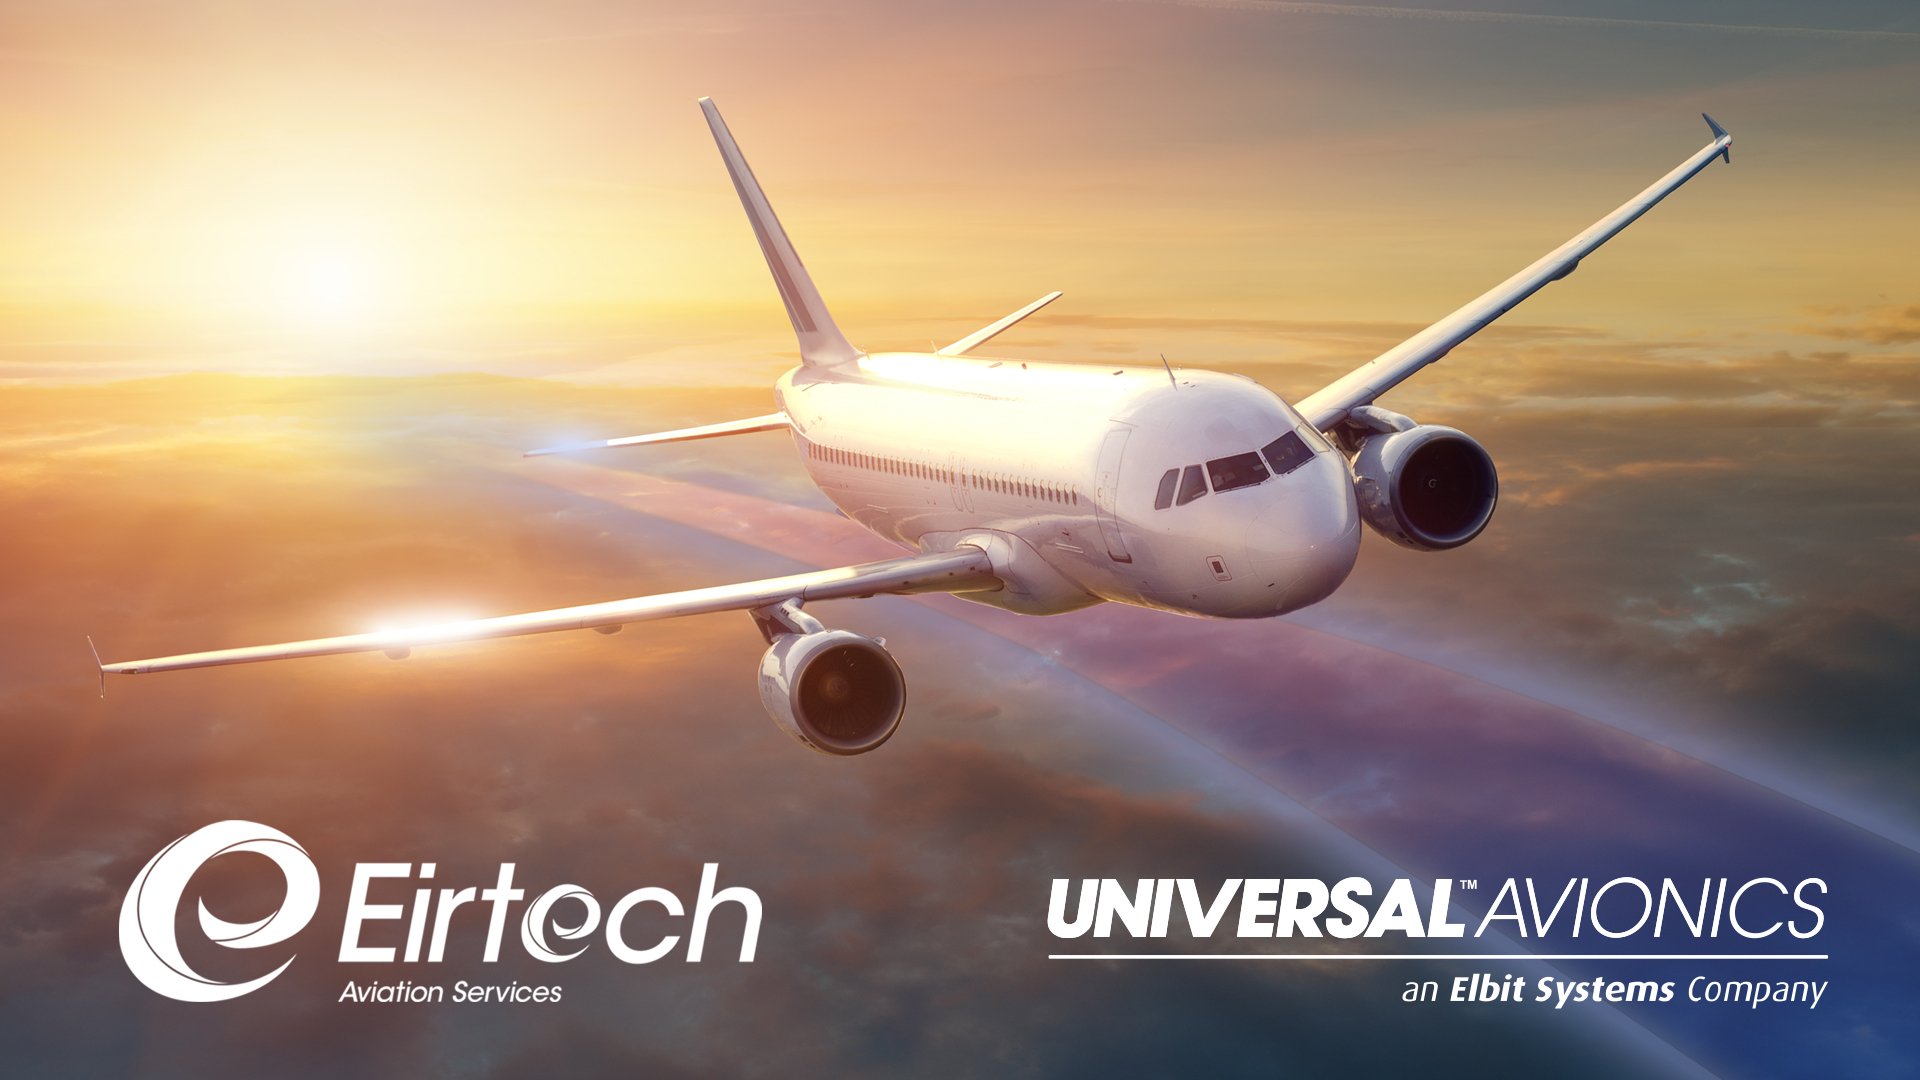 Eirtech Aviation Services will upgrade fleet of Airbus A320 with UA's cutting-edge data link solution.